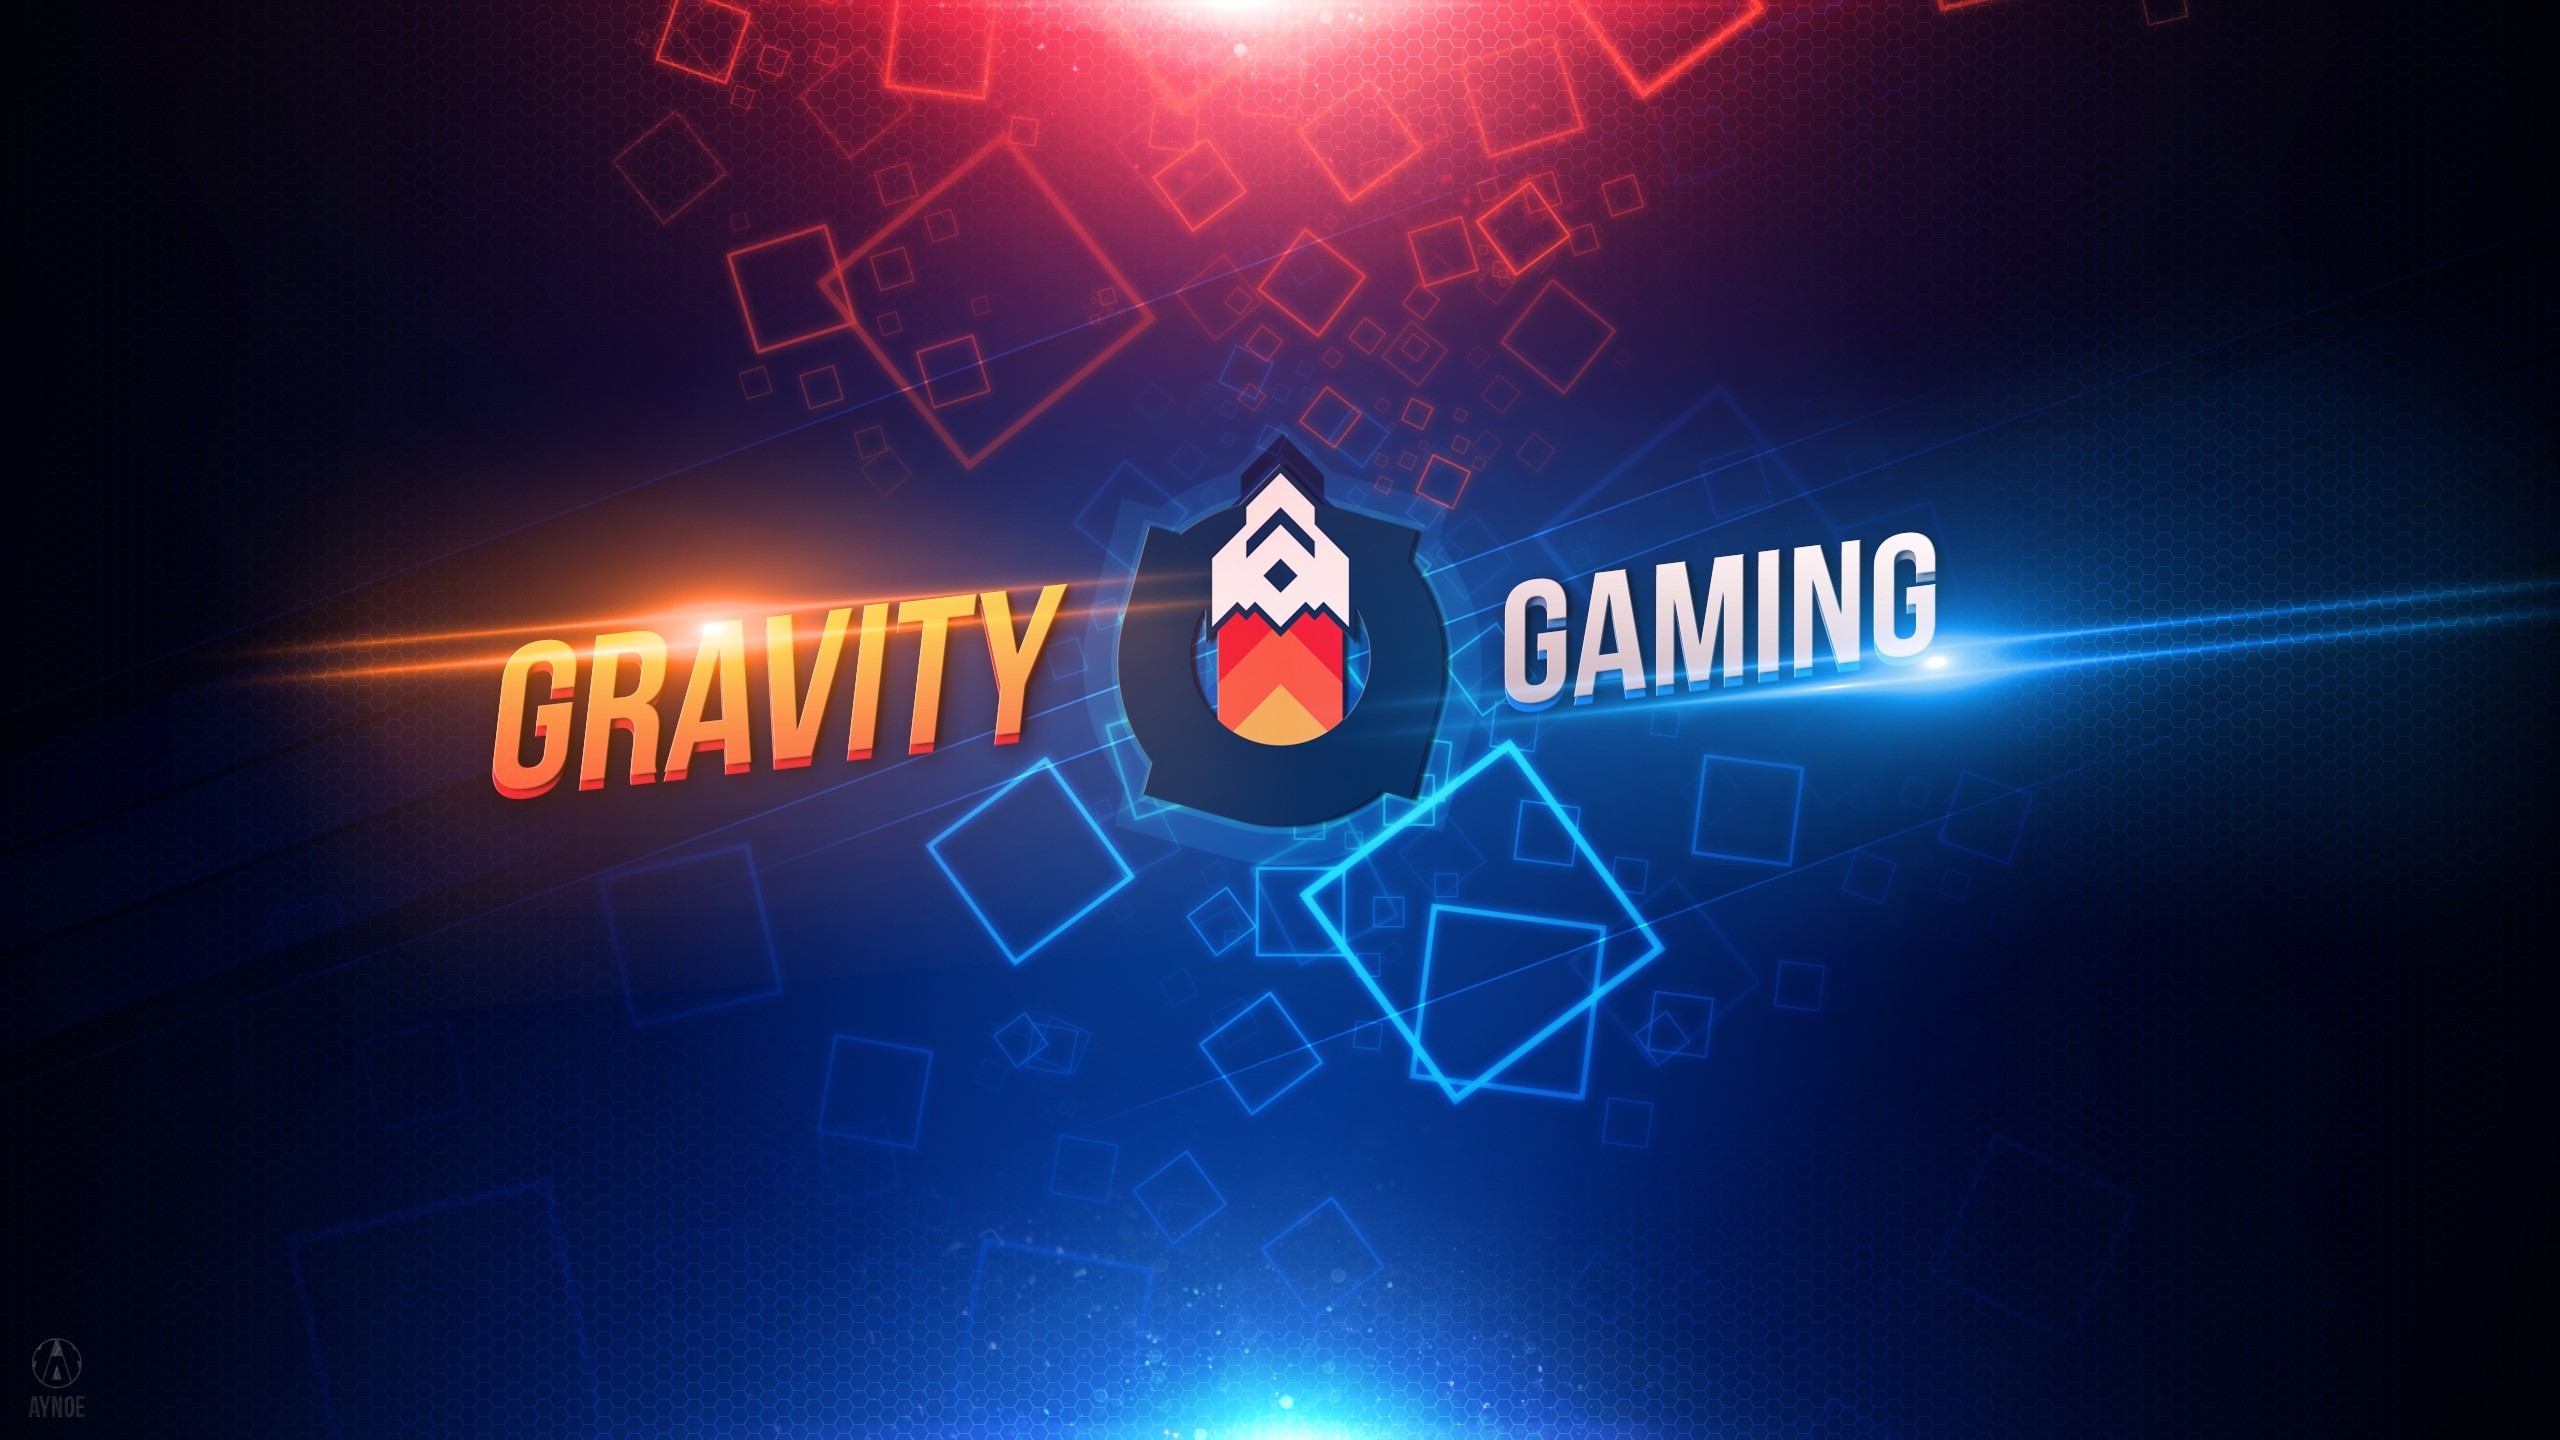 2560x1440 Gravity gaming wallpapers logo league of legends.